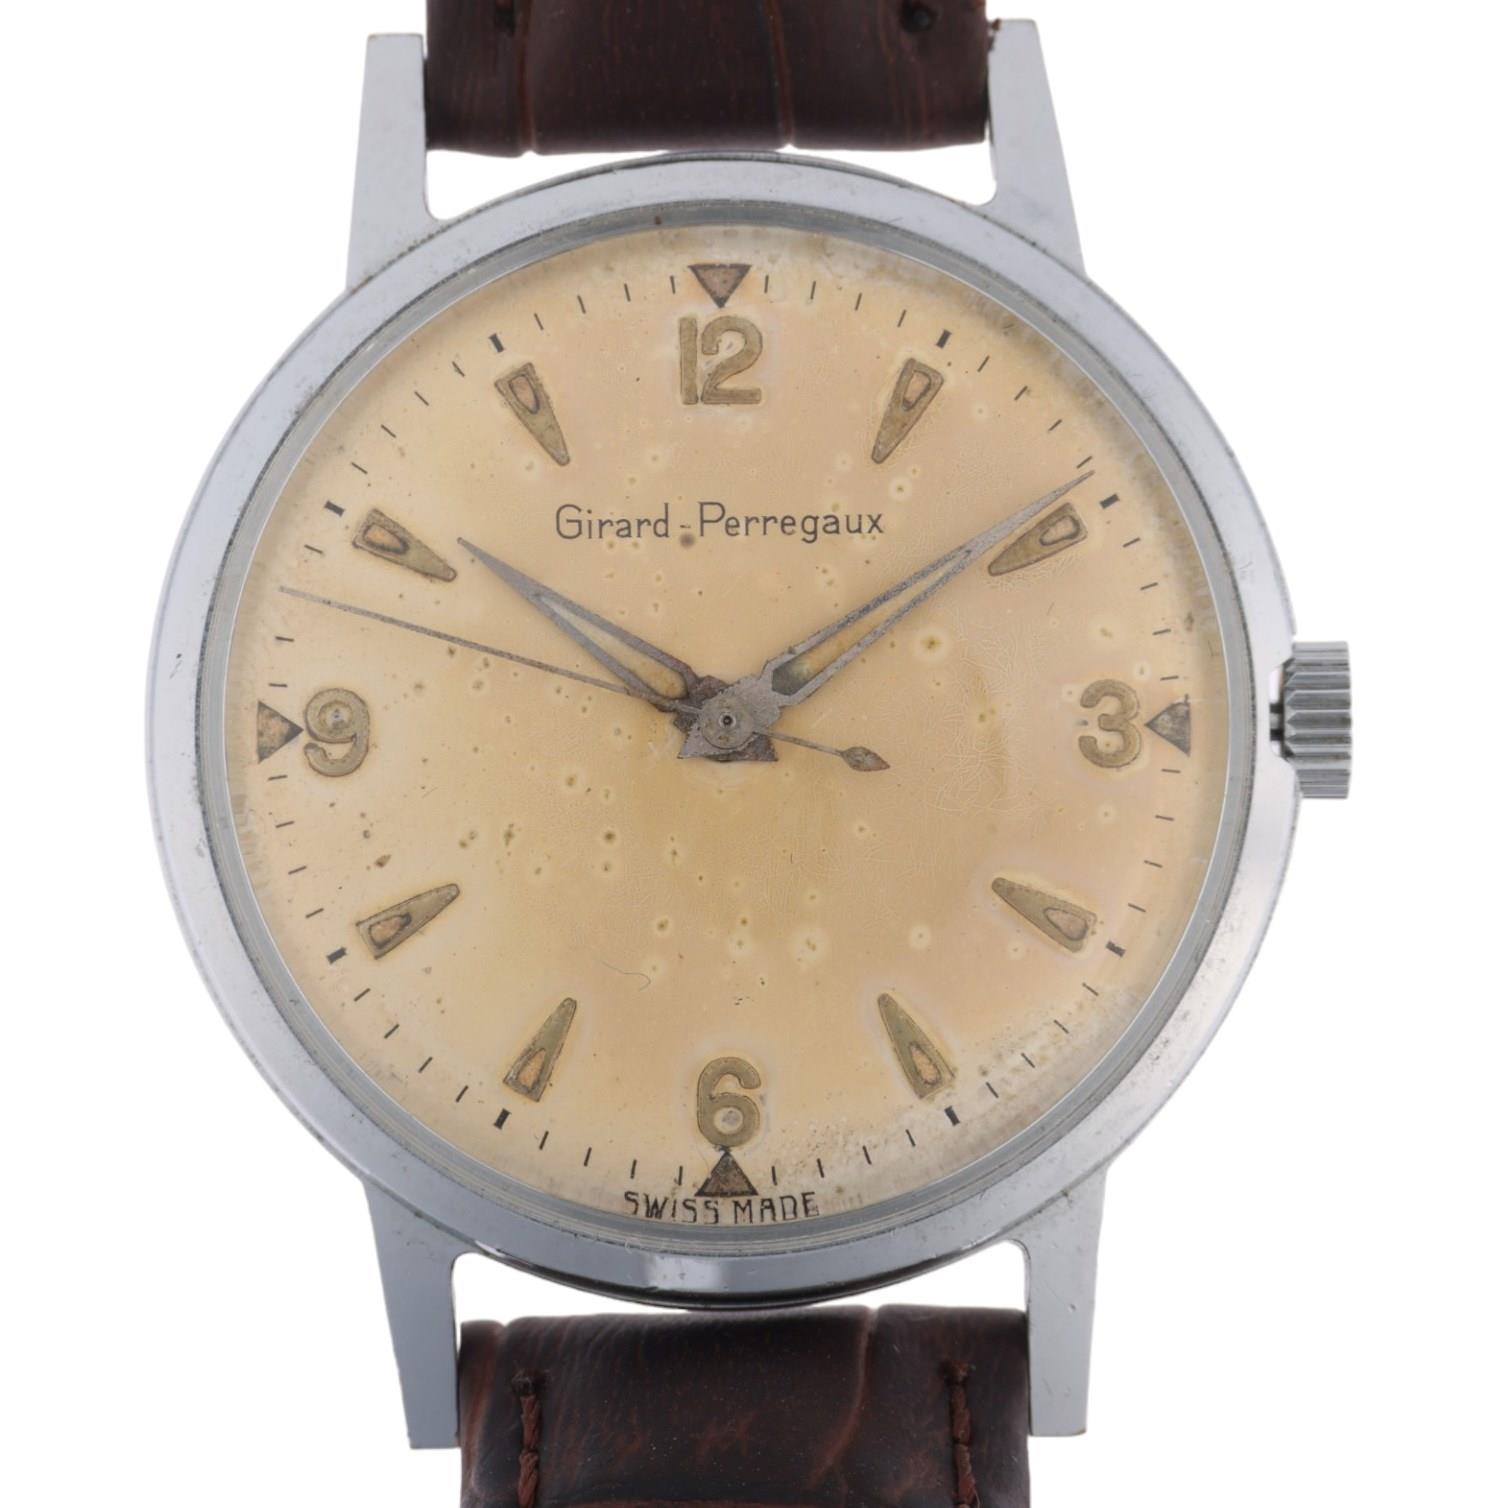 GIRARD-PERREGAUX - a stainless steel mechanical wristwatch, circa 1970s, silvered dial with